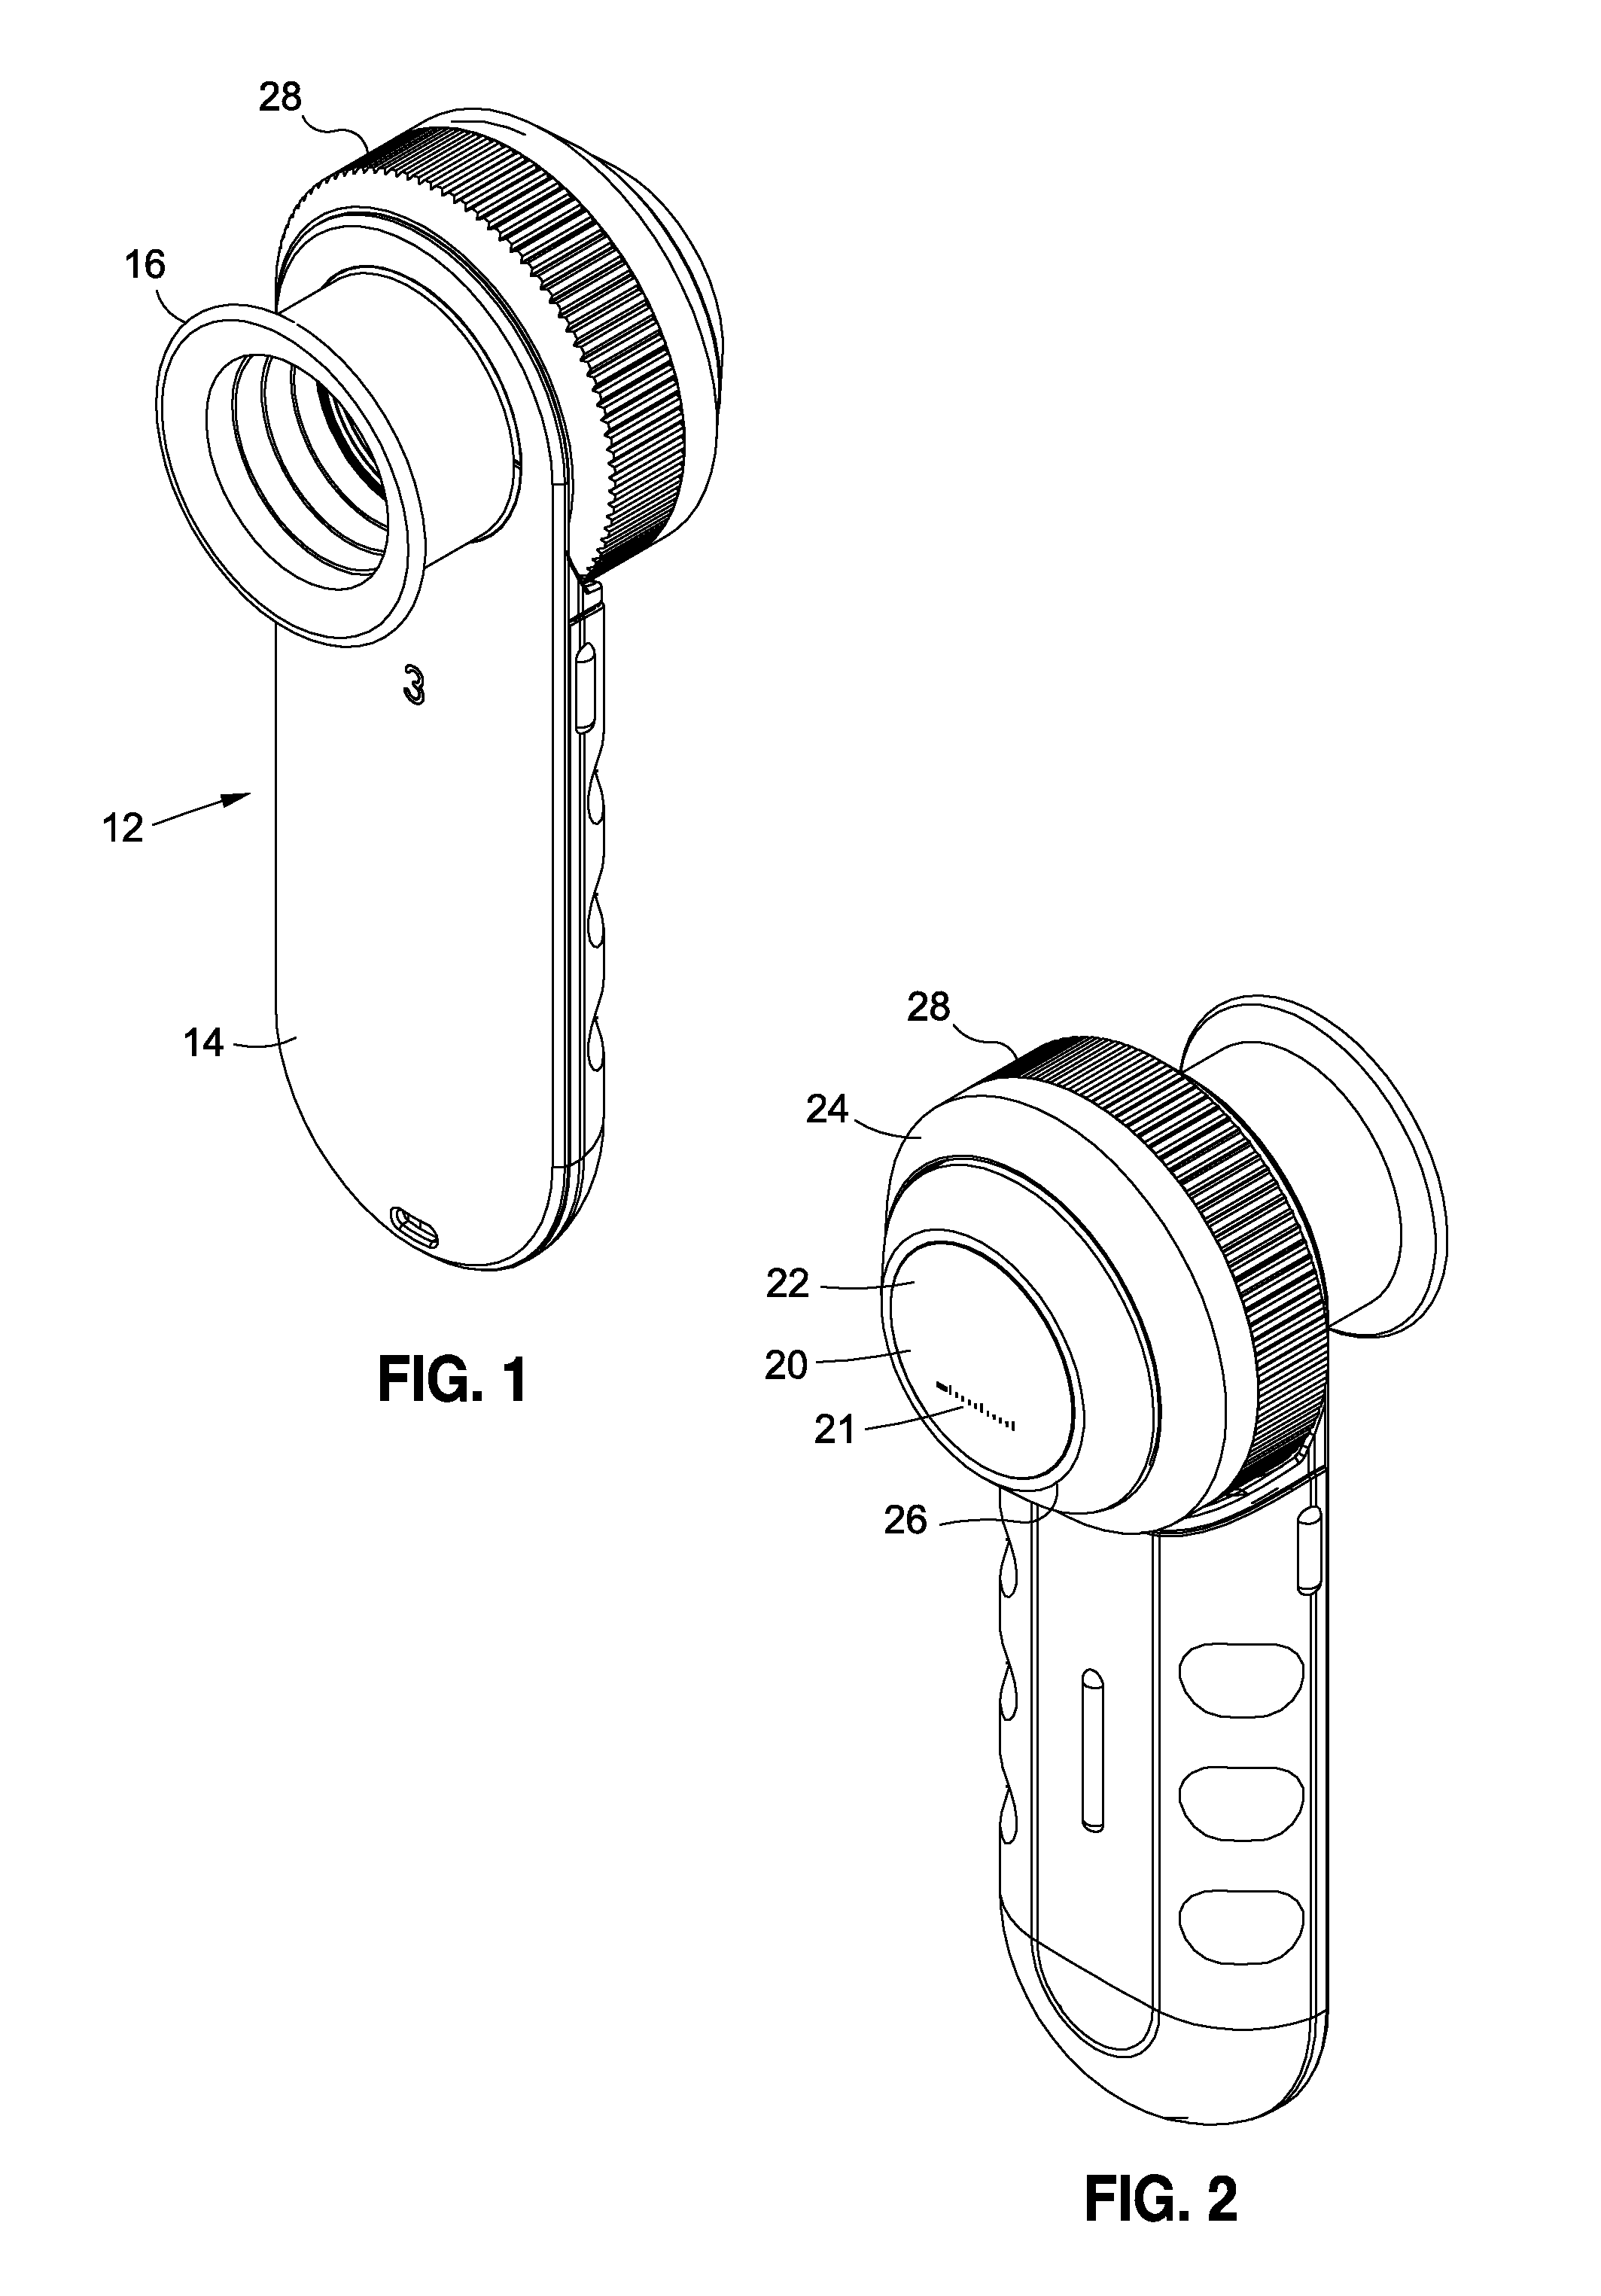 Dermoscopy illumination device with selective polarization and orange light for enhanced viewing of pigmented tissue